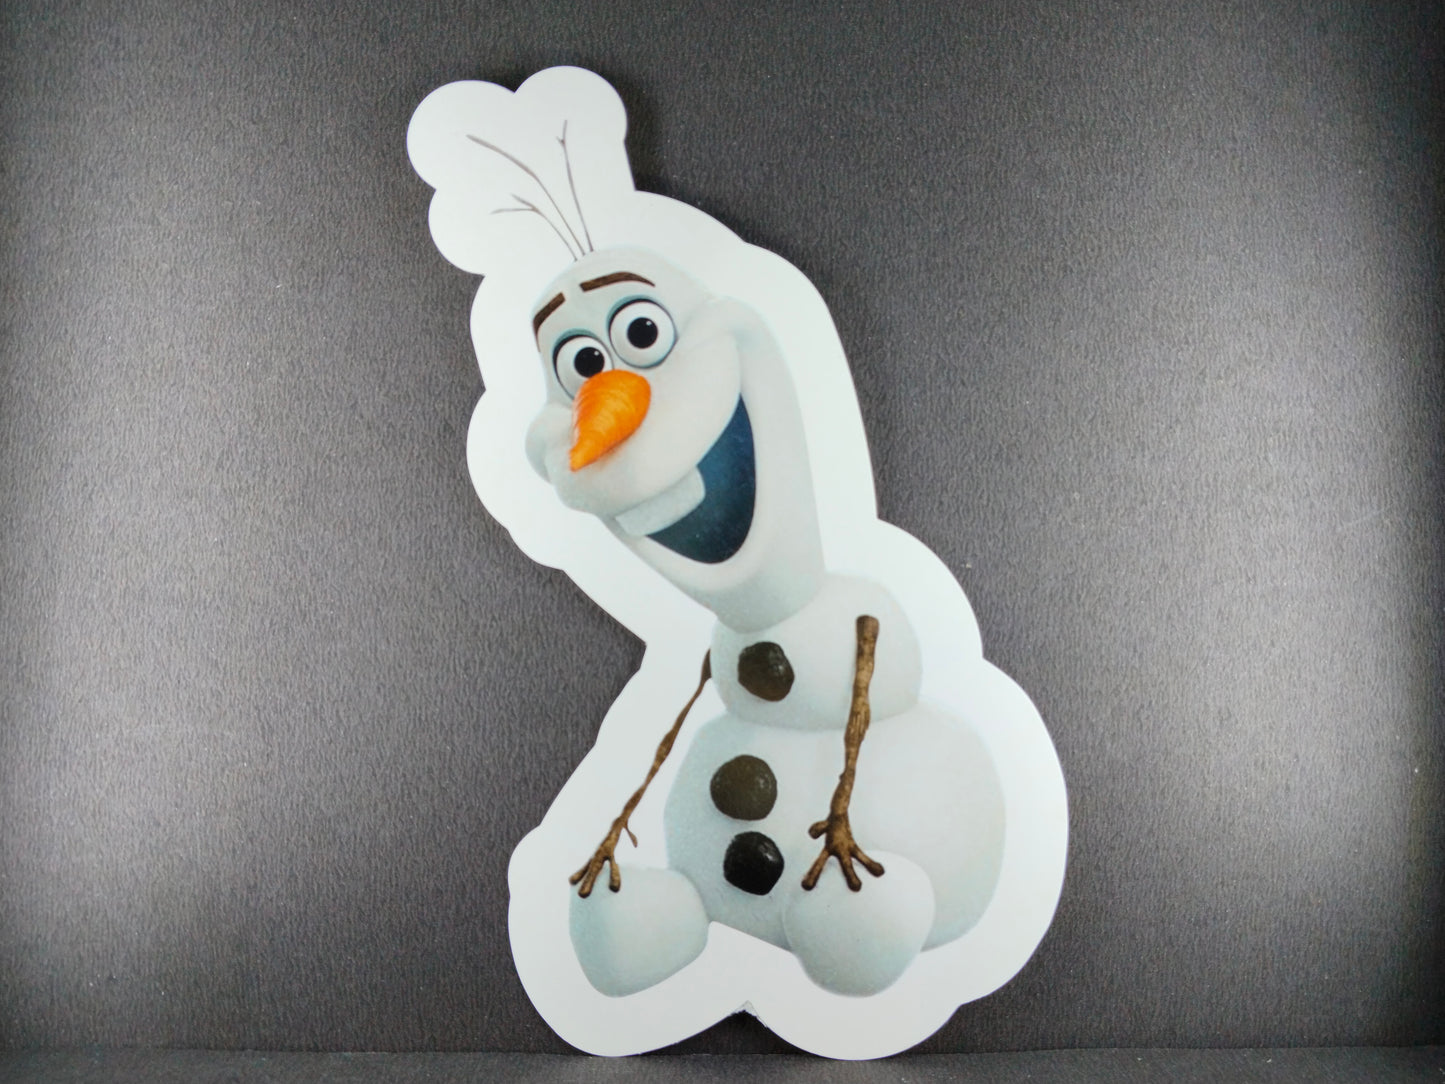 Birthday Decoration Kit - Frozen Theme for Simple Birthday Decorations at Home